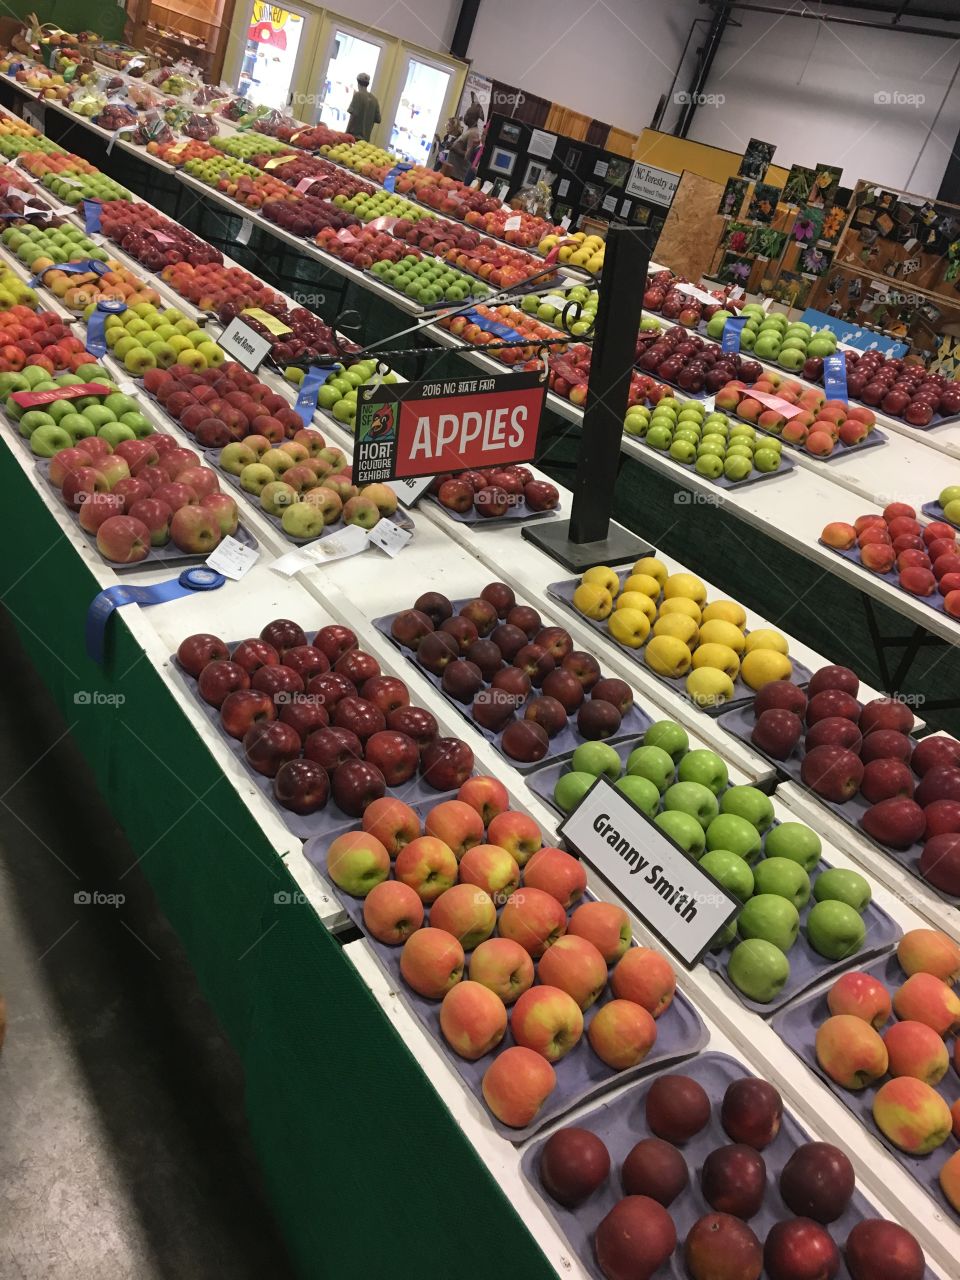 Prize winning apples at the state fair